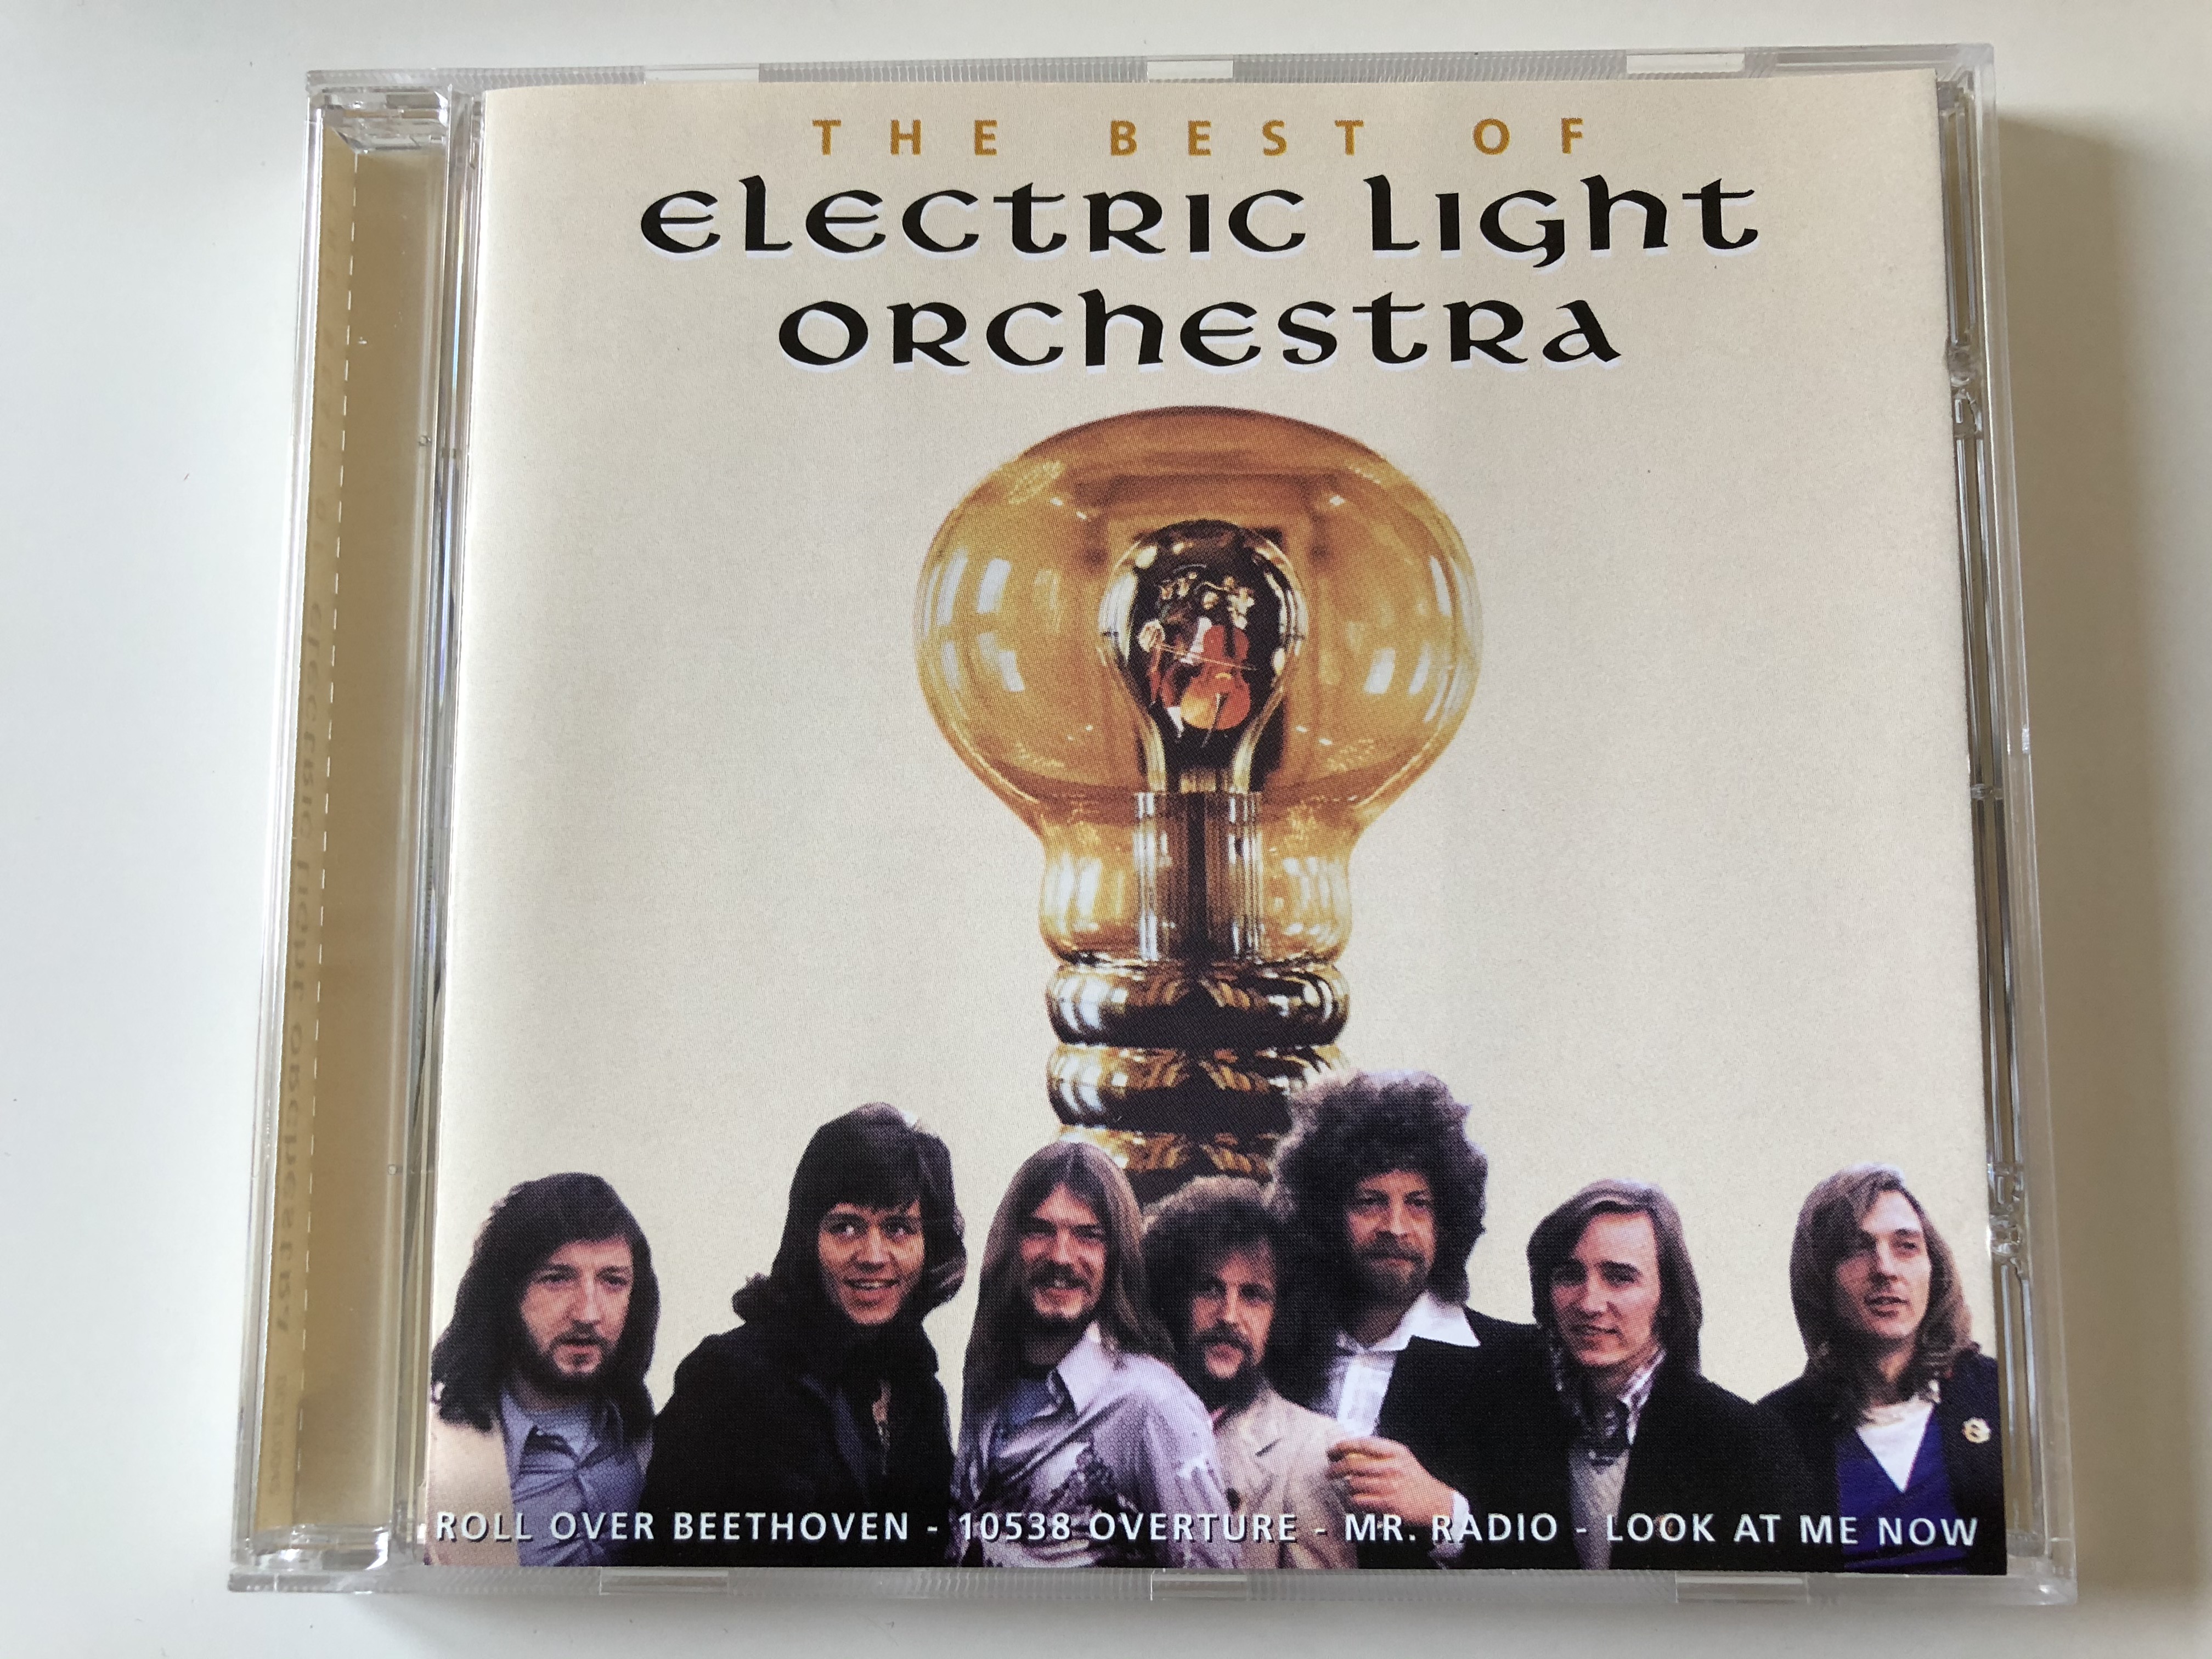 the-best-of-electric-light-orchestra-roll-over-beethoven-10538-overture-mr.-radio-look-at-me-now-disky-audio-cd-1996-dc-870042-1-.jpg